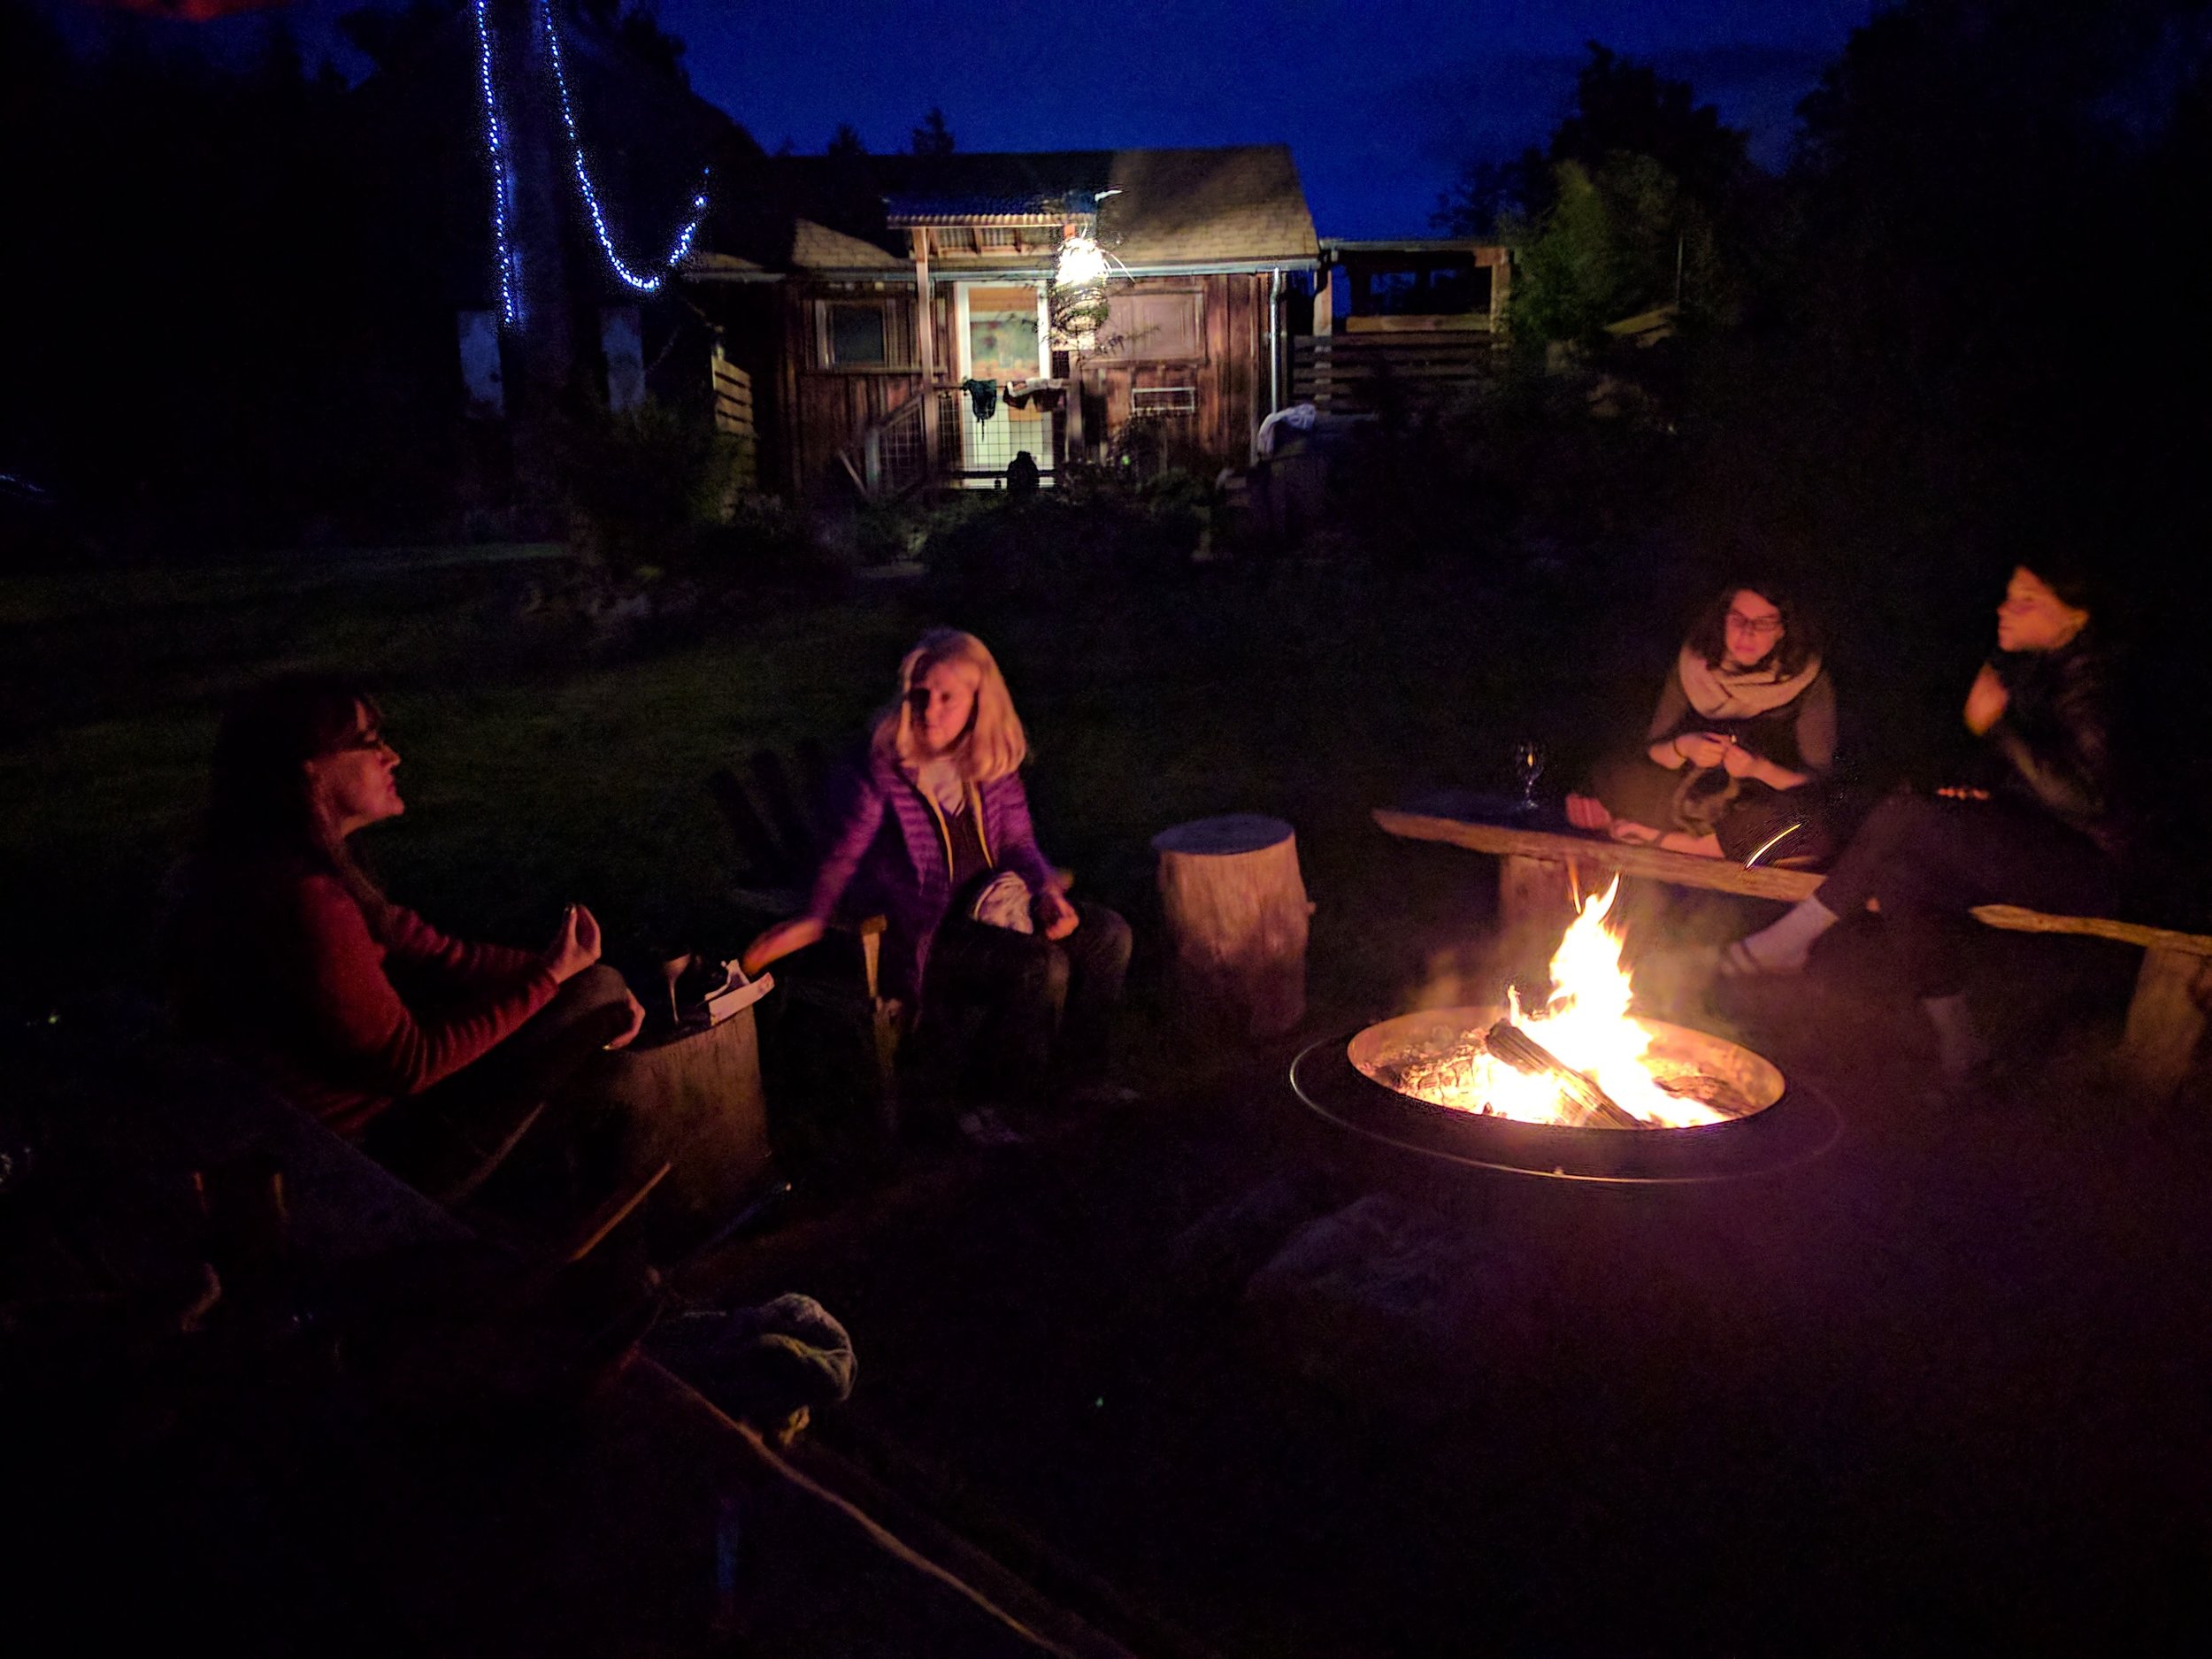  fireside chat at night 